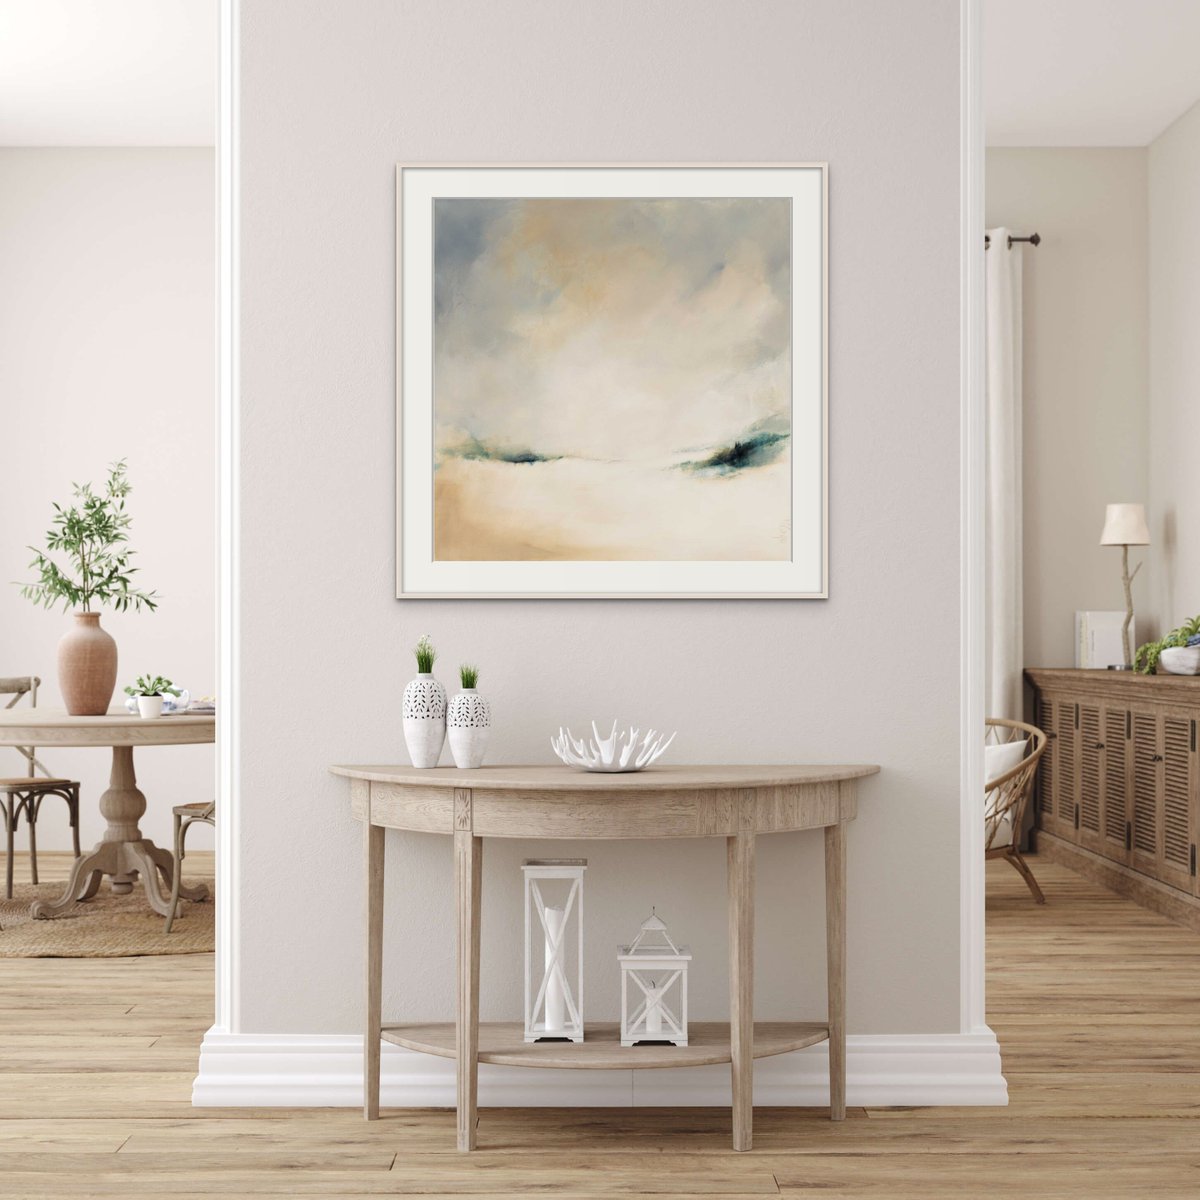 Drawing inspiration from the sand, the sky, and the sea💙 the contemporary coastal decor trend is perfect for creating a calming and sophisticated space! Shop our new Contemporary Coastal art collection on our site #coastalinteriors #neutraltones #calmingdecor #coastalcollection